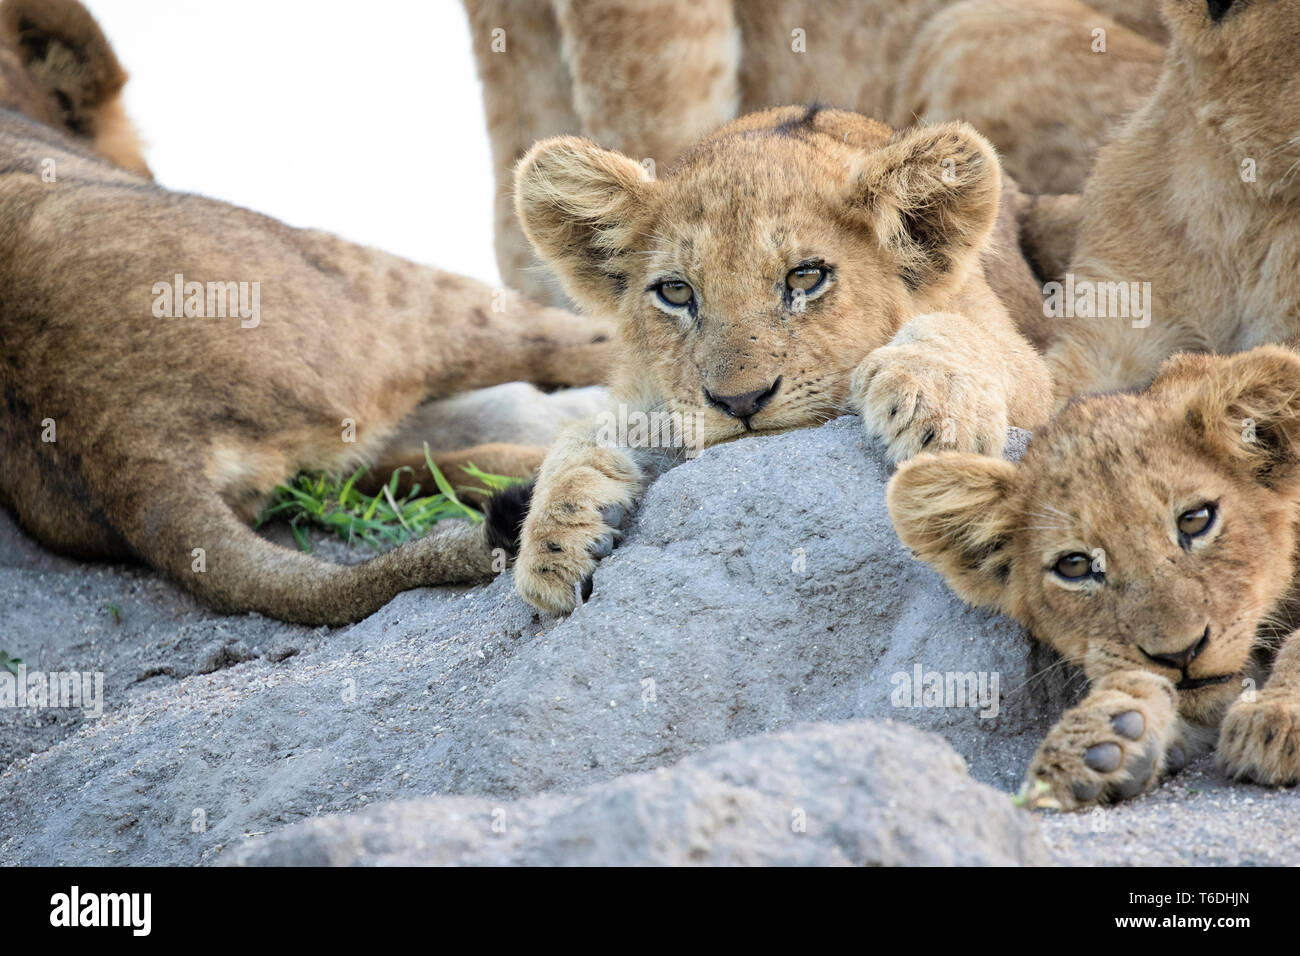 Lion cubs, Panthera leo, lie together on a termite mound, ears forward,  looking out of frame Stock Photo - Alamy